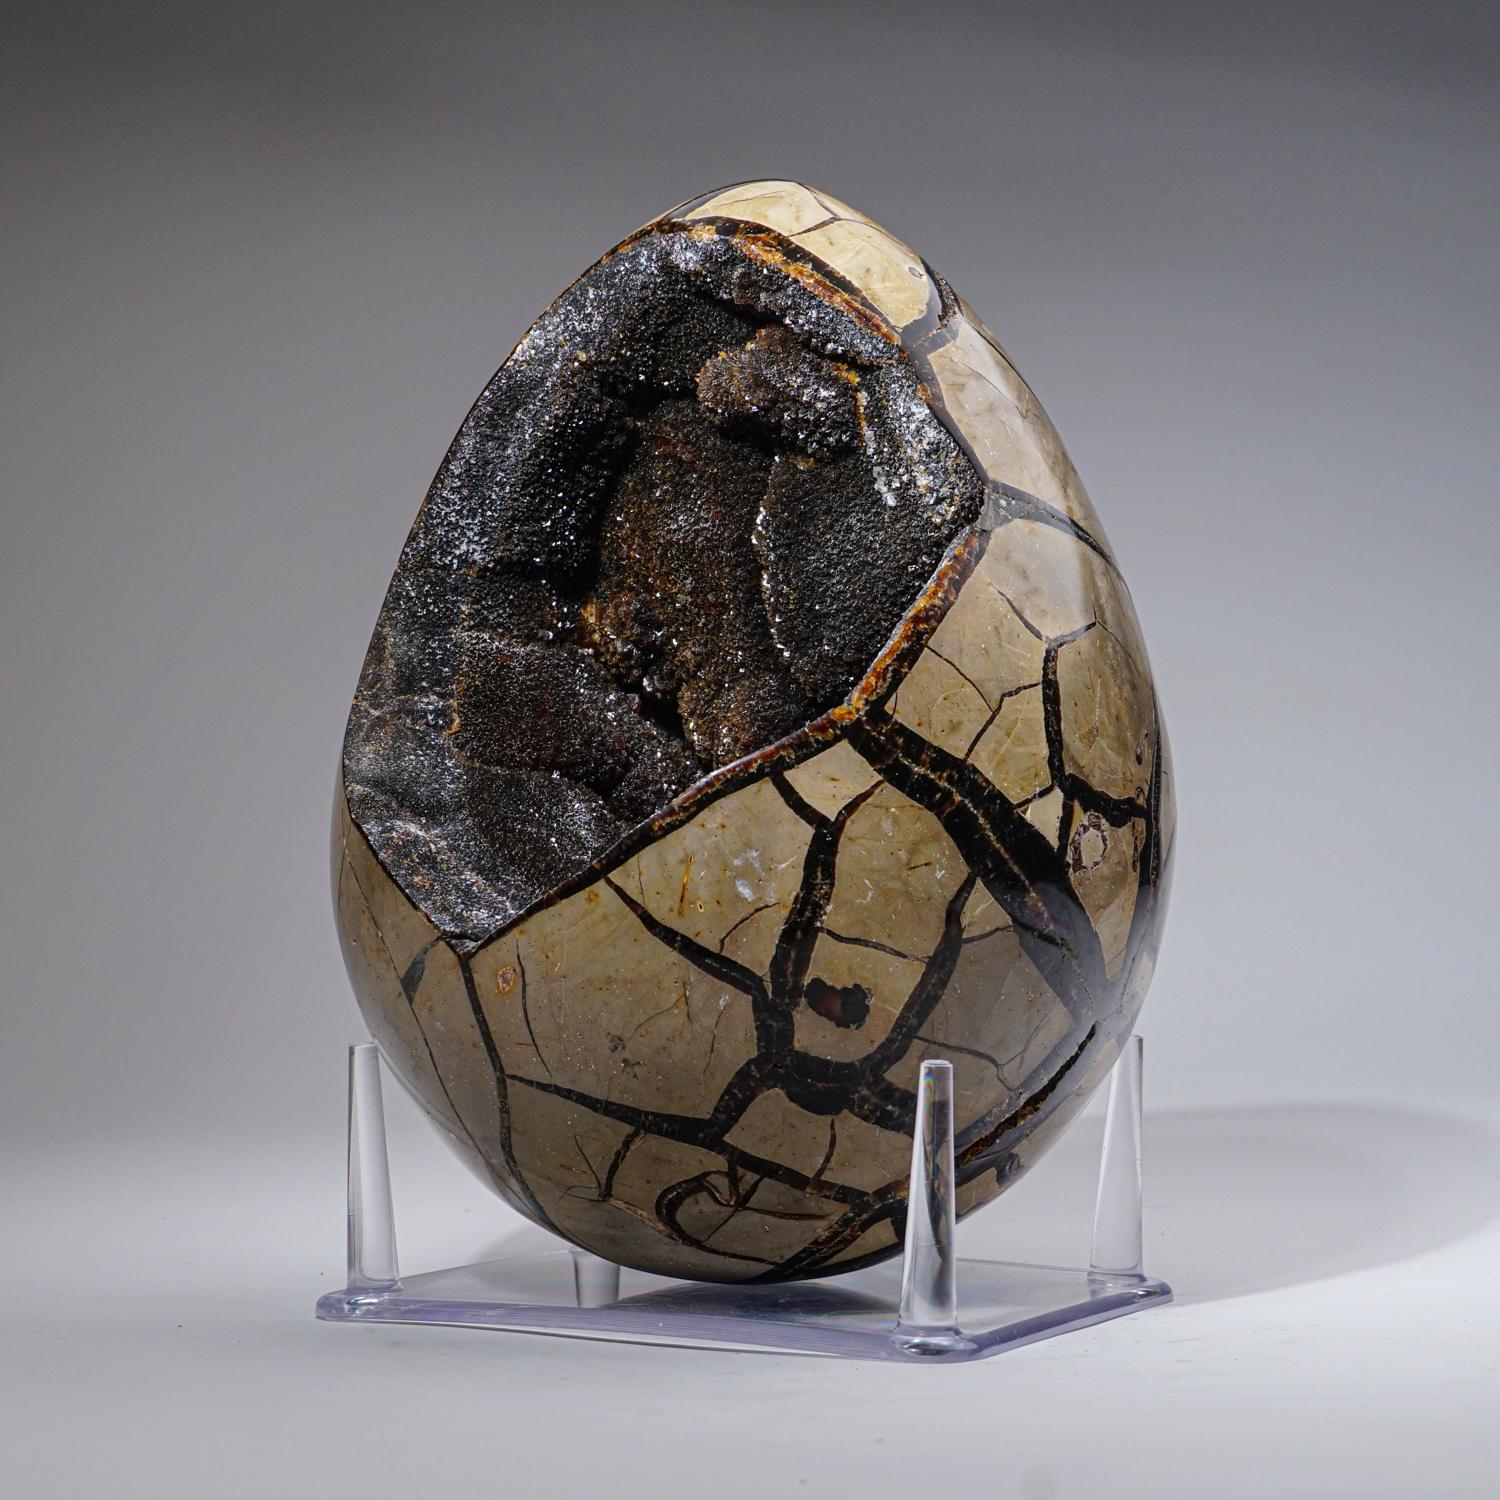 This 19.4 lb AAA quality Large Septarian Druzy Geode Egg from Madagascar features an exposed area lined with dazzling druzy quartz crystals, as well as a polished back side, providing a high reflective surface. Septarian is a combination of yellow